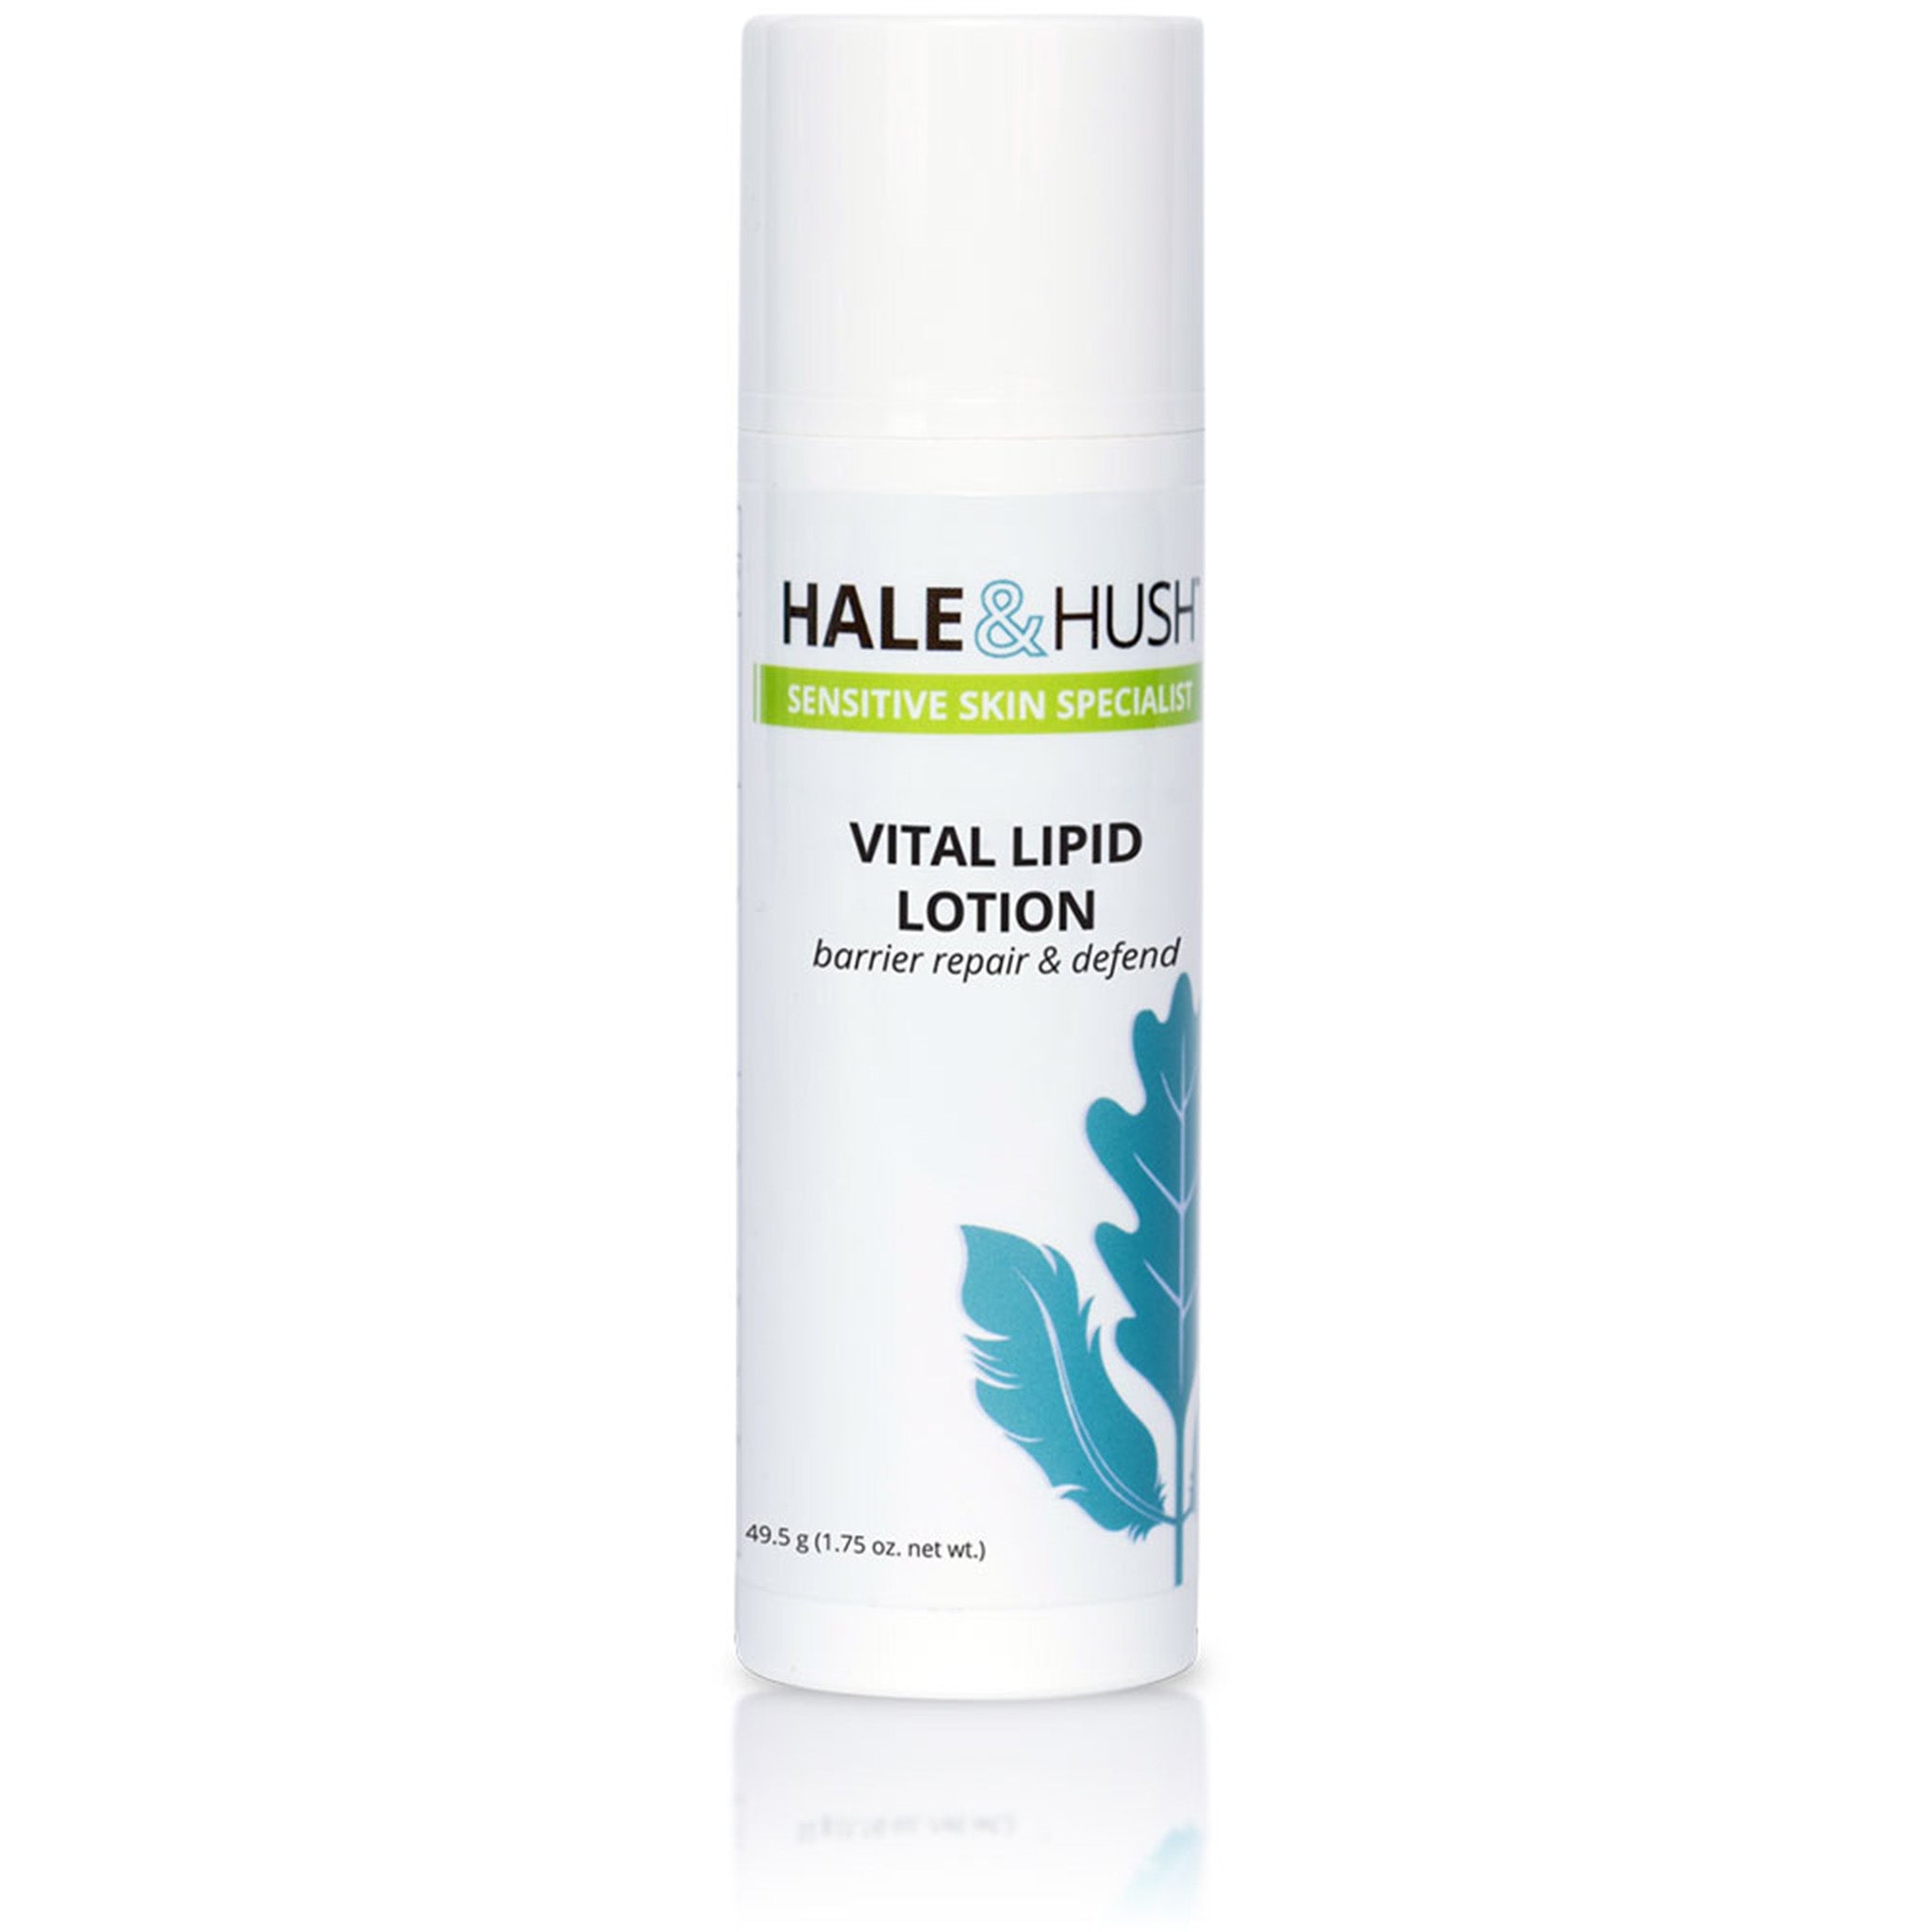 Vital Lipid Lotion hydrates, reduces redness, inflammation and discomfort. Increases elasticity and improves texture.